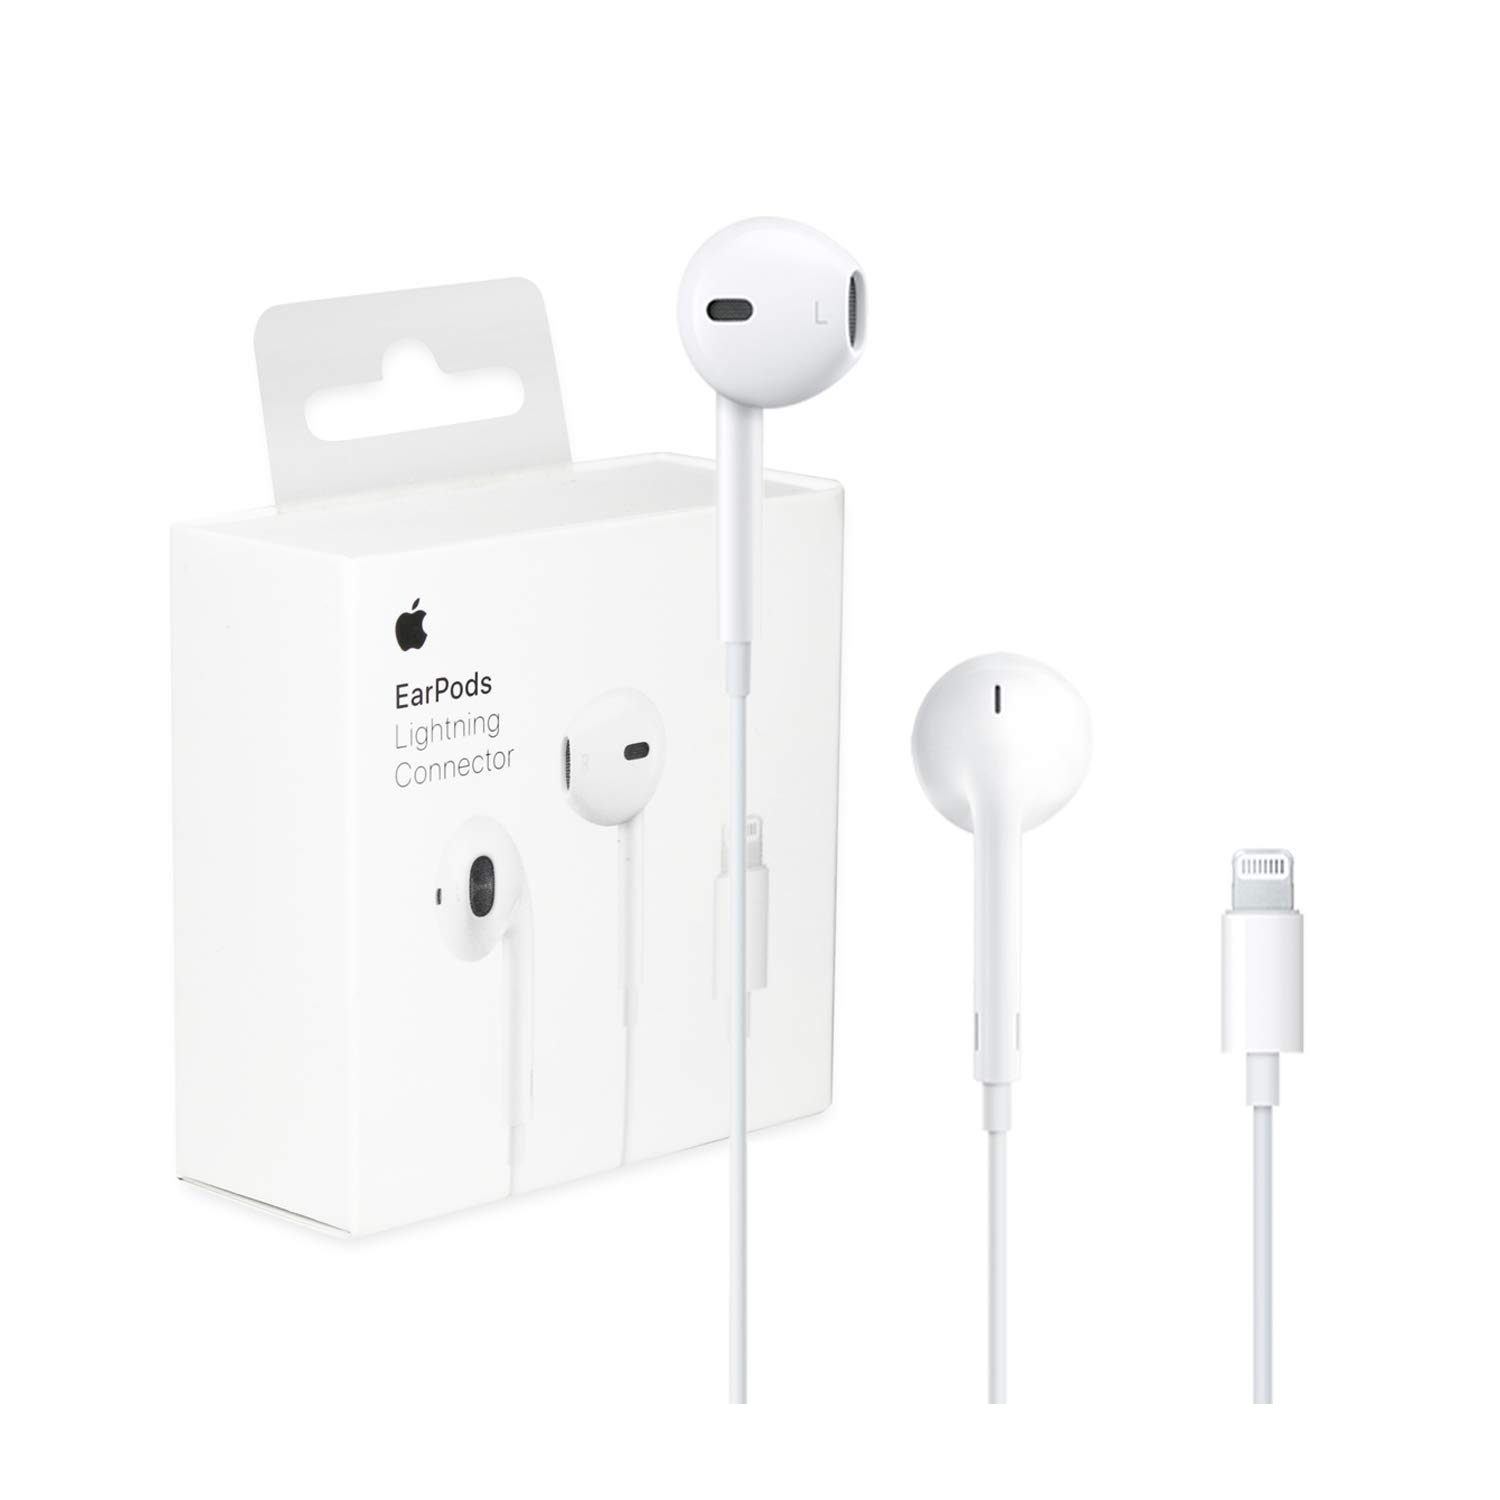 Headphones/Earphones/Earbuds with Mic and Volume Control for Apple iPhone 7/7 Plus/8/8 Plus/X/XS/XS MAX